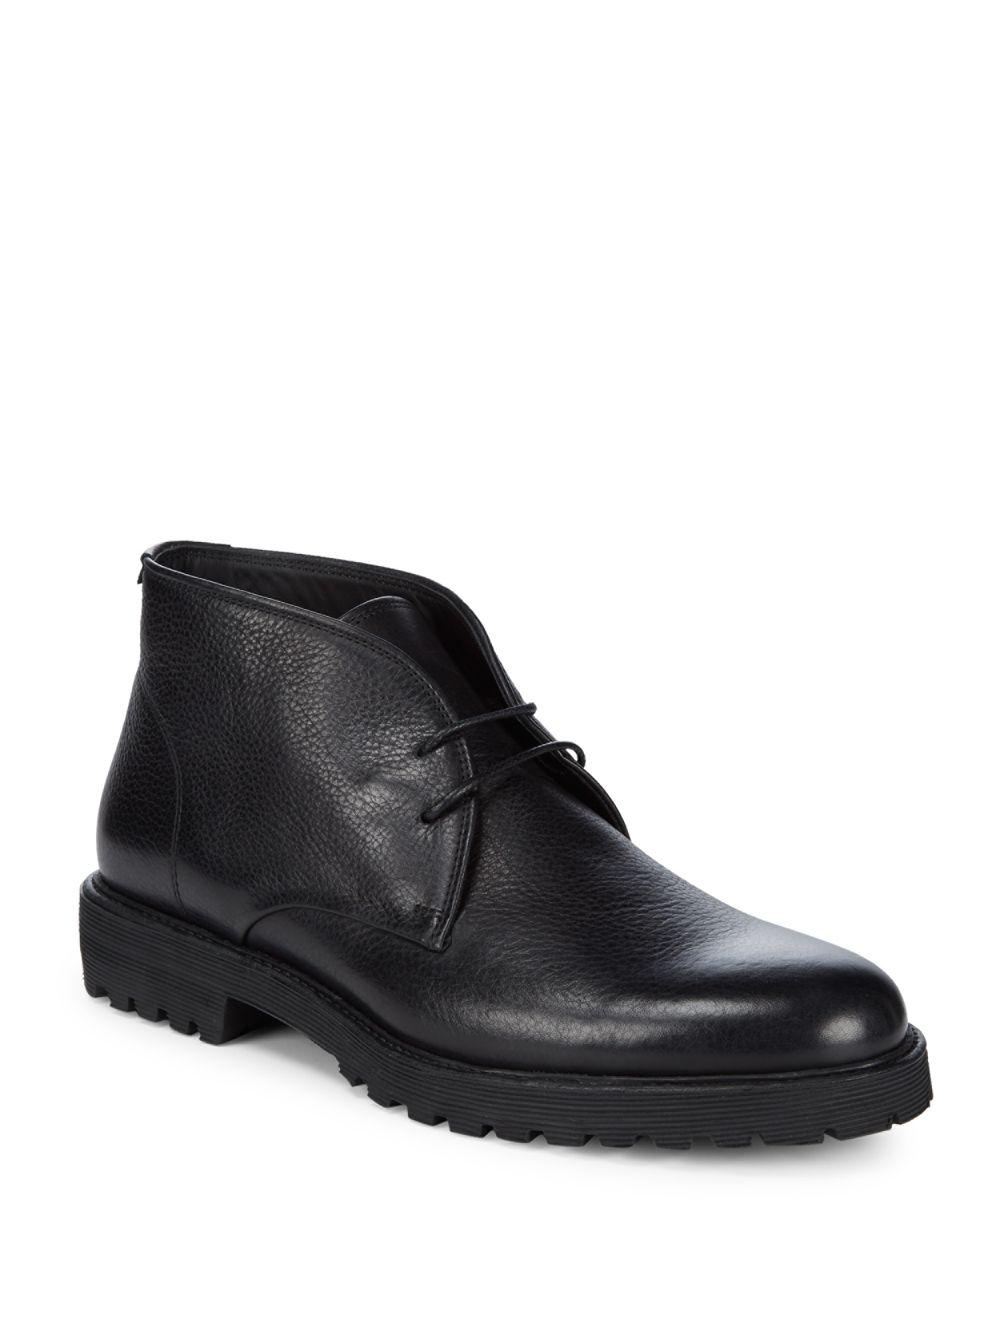 Vince Classic Leather Chukka Boots in Black for Men - Lyst